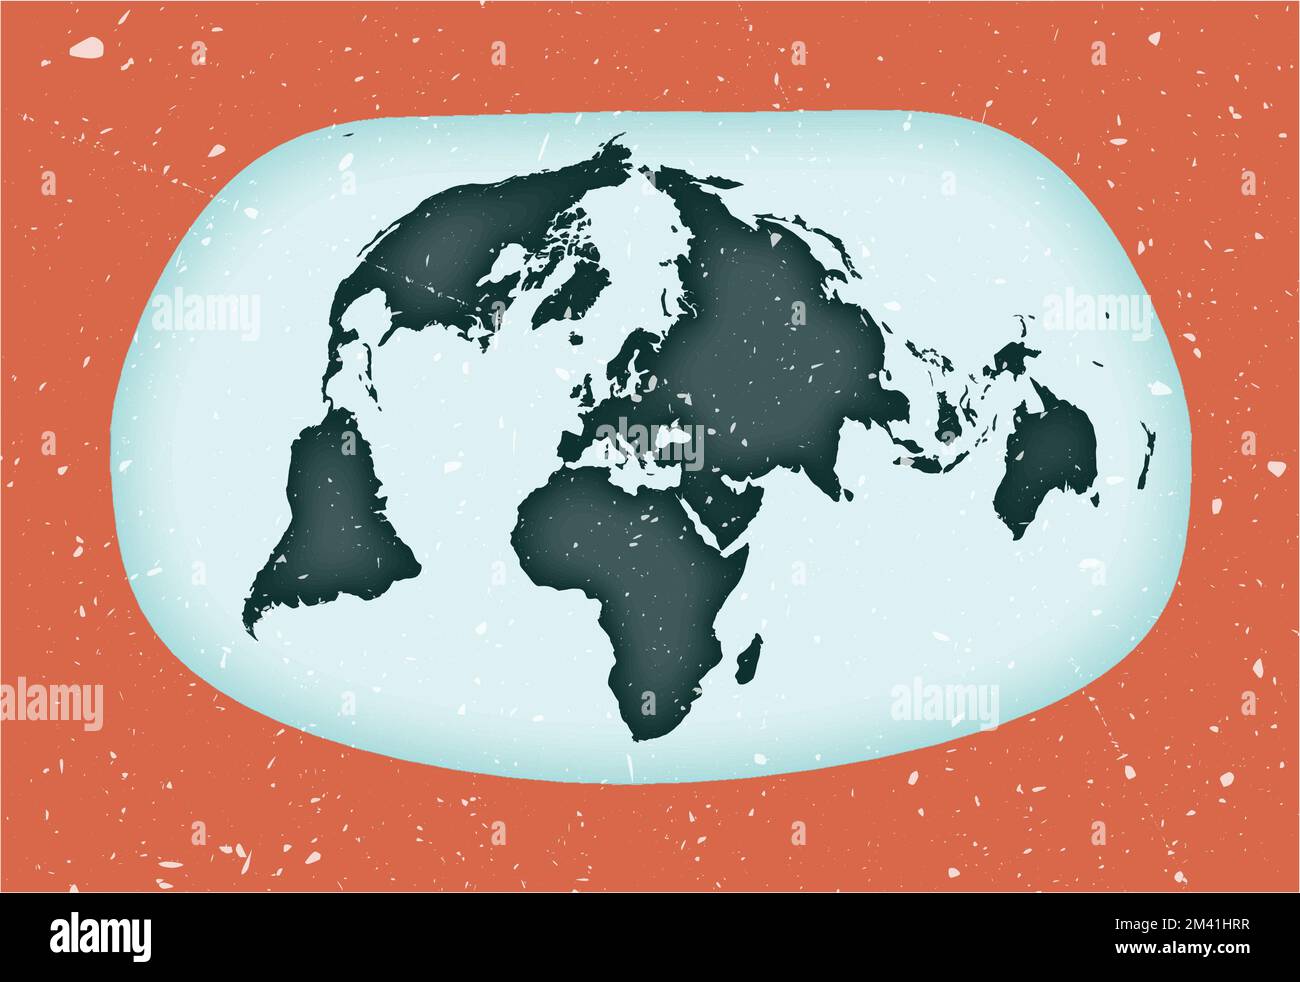 World Map Vector Jacques Bertins 1953 Projection Stock Illustration -  Download Image Now - iStock